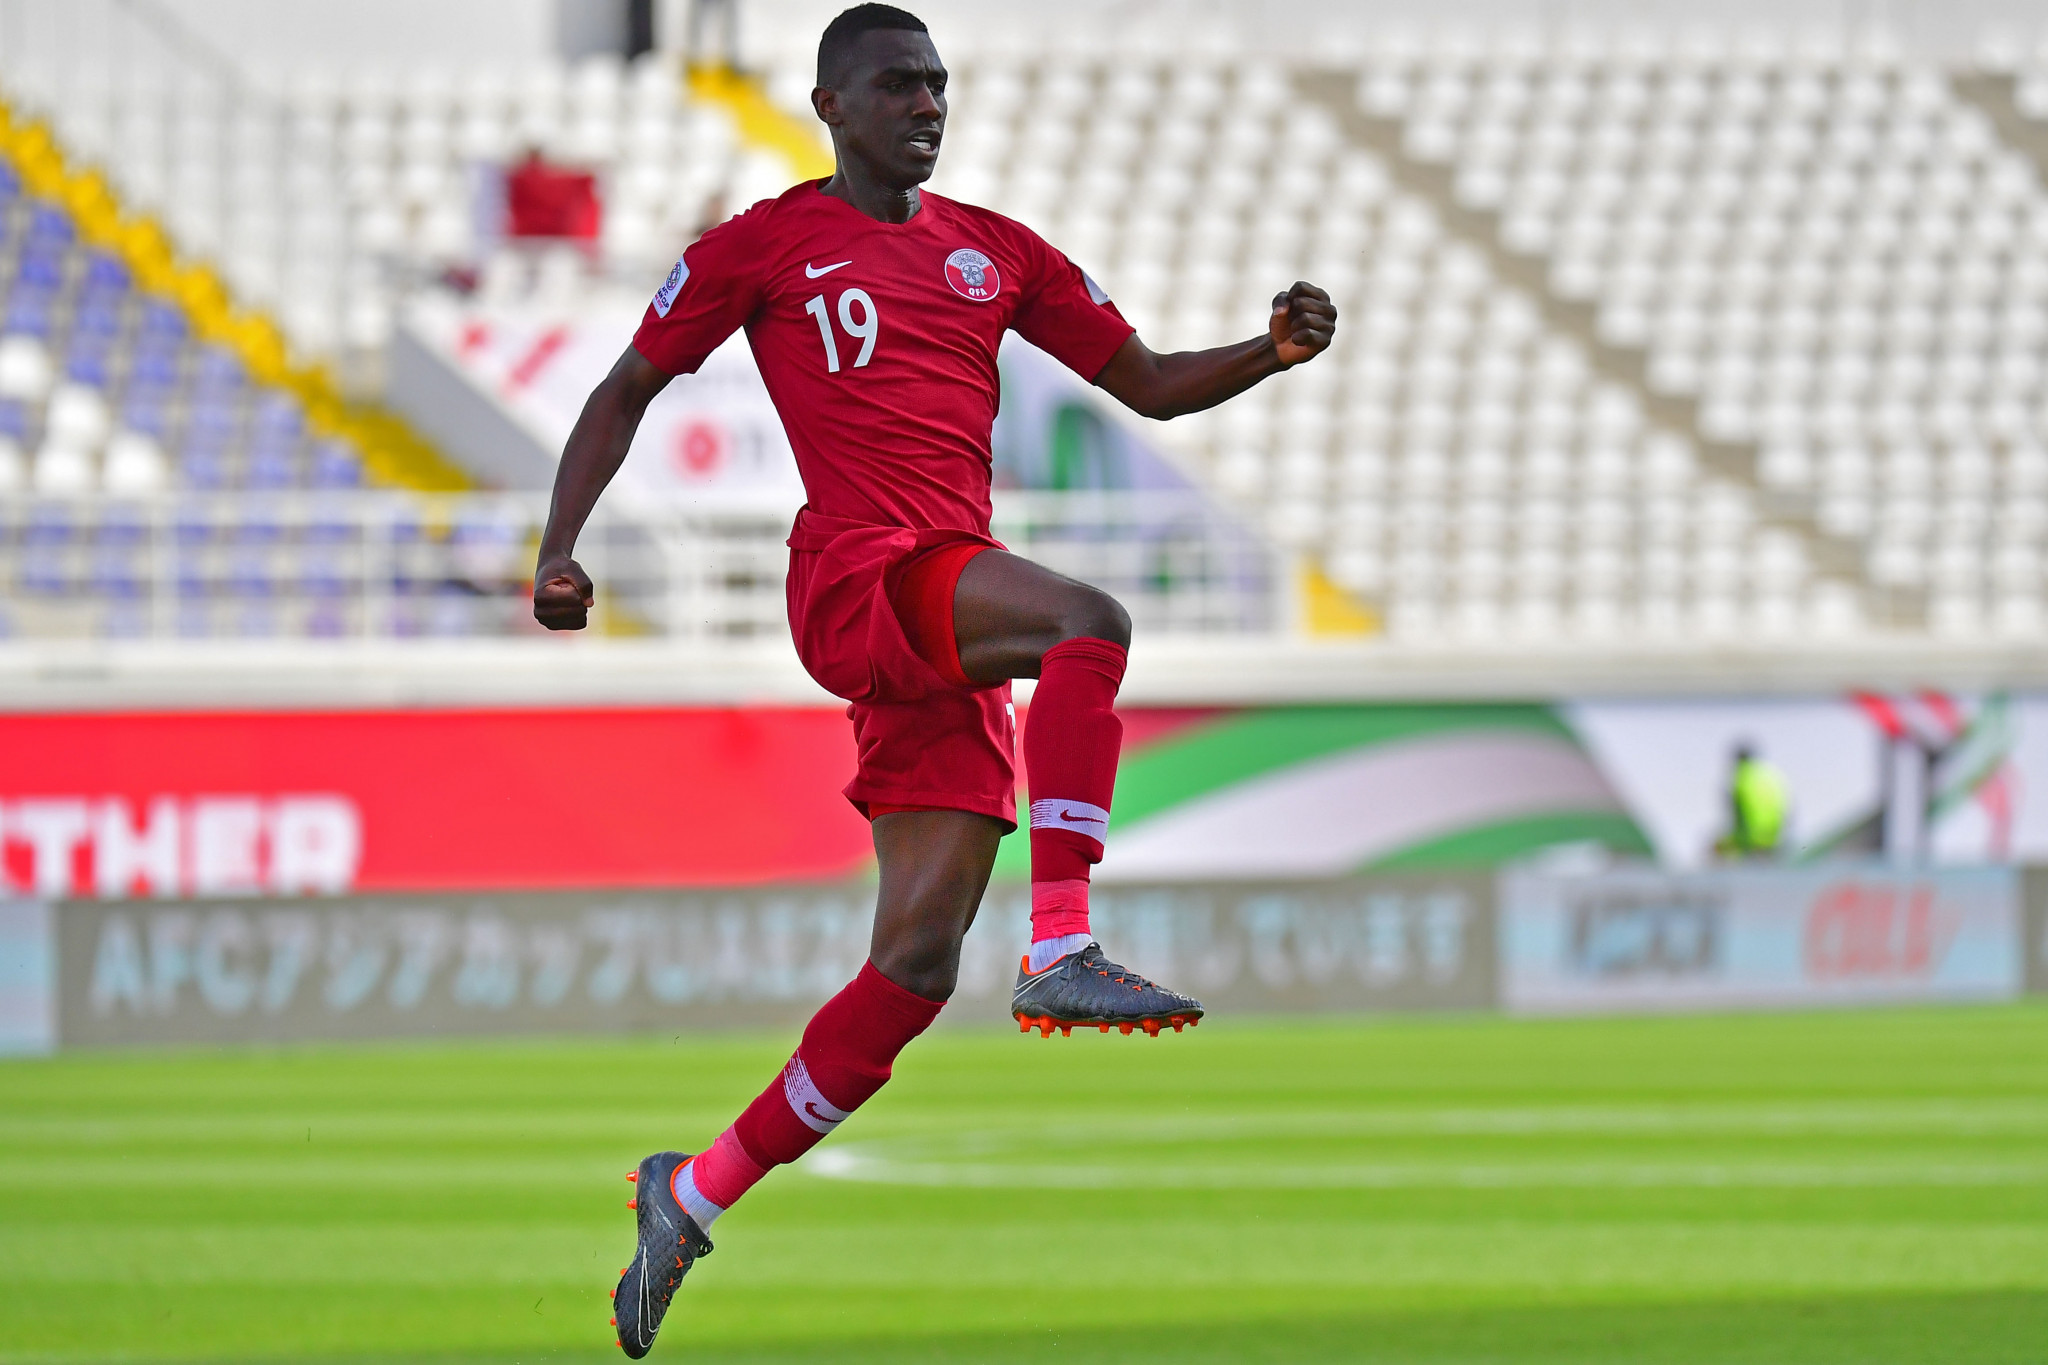 Qatar's Almoez Ali scored four times in Qatar's 6-0 defeat of North Korea at the AFC Asian Cup ©Getty Images